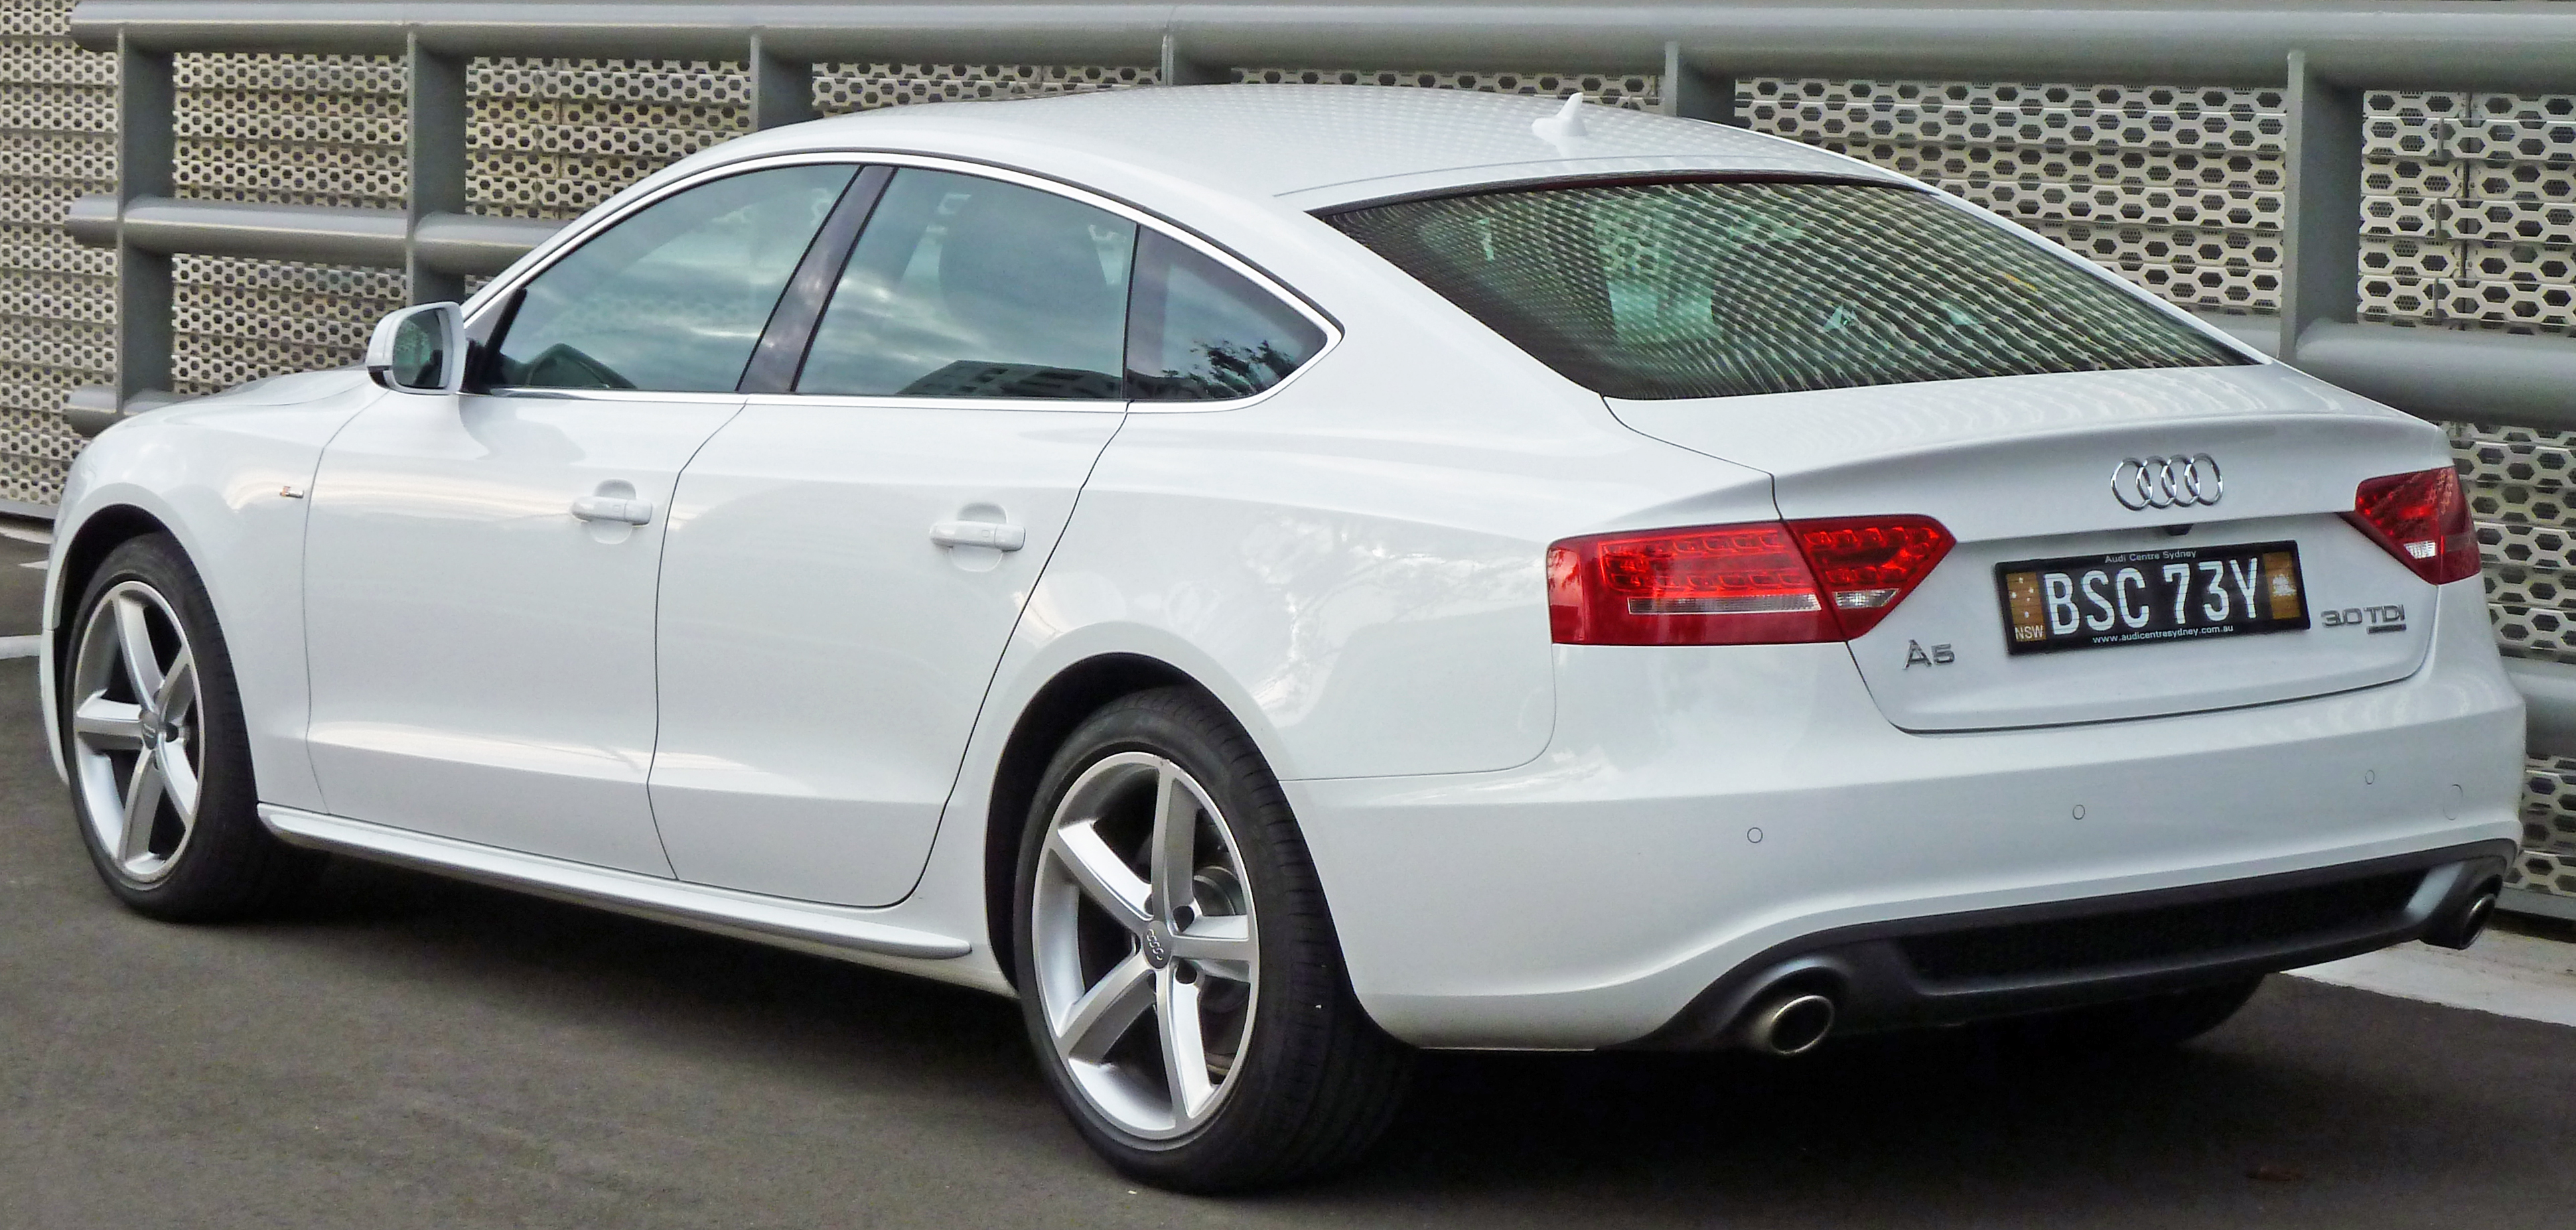 Audi A5 Exterior Rear Side View